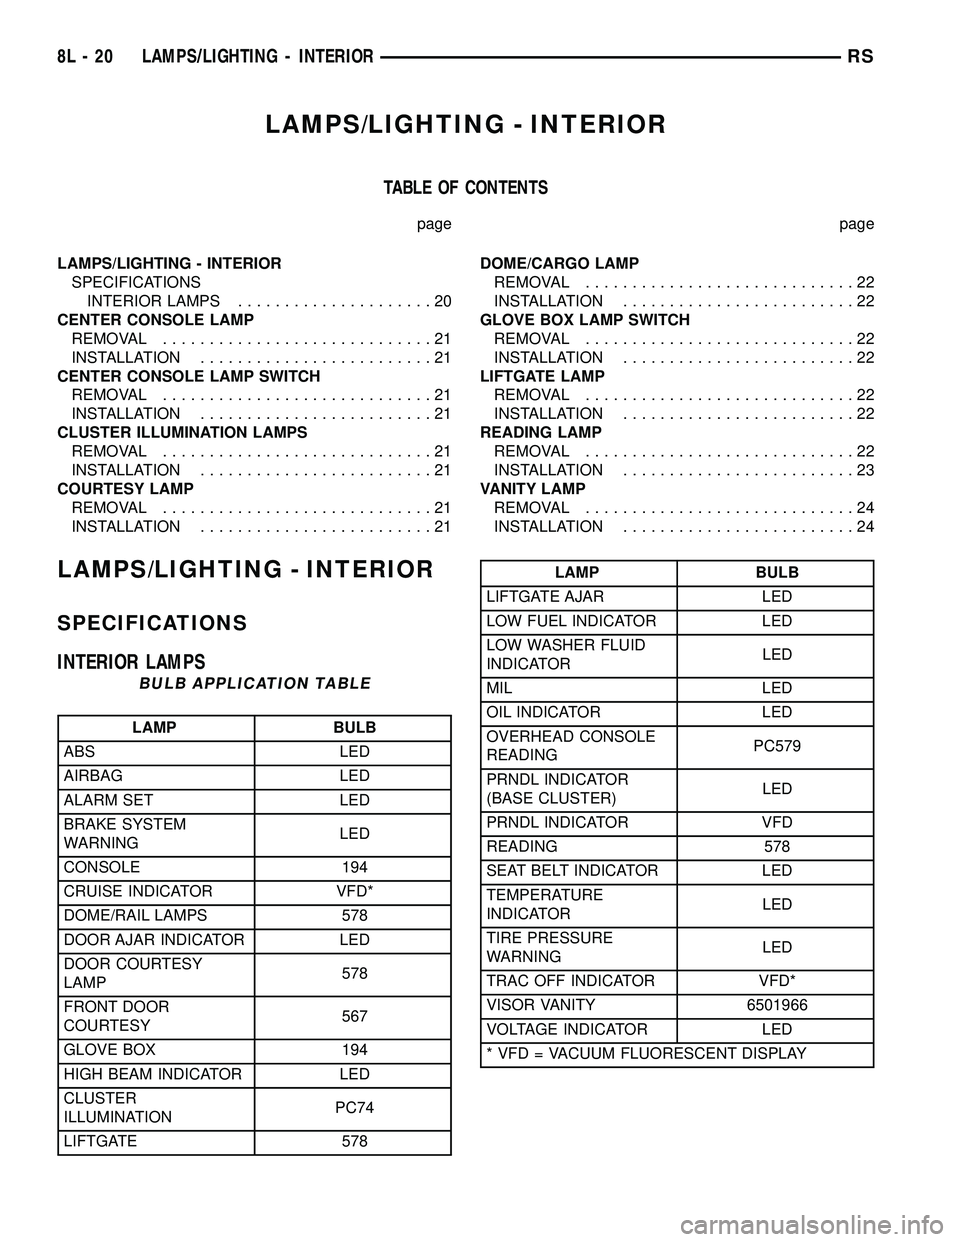 CHRYSLER CARAVAN 2005  Service Manual LAMPS/LIGHTING - INTERIOR
TABLE OF CONTENTS
page page
LAMPS/LIGHTING - INTERIOR
SPECIFICATIONS
INTERIOR LAMPS.....................20
CENTER CONSOLE LAMP
REMOVAL.............................21
INSTALLA